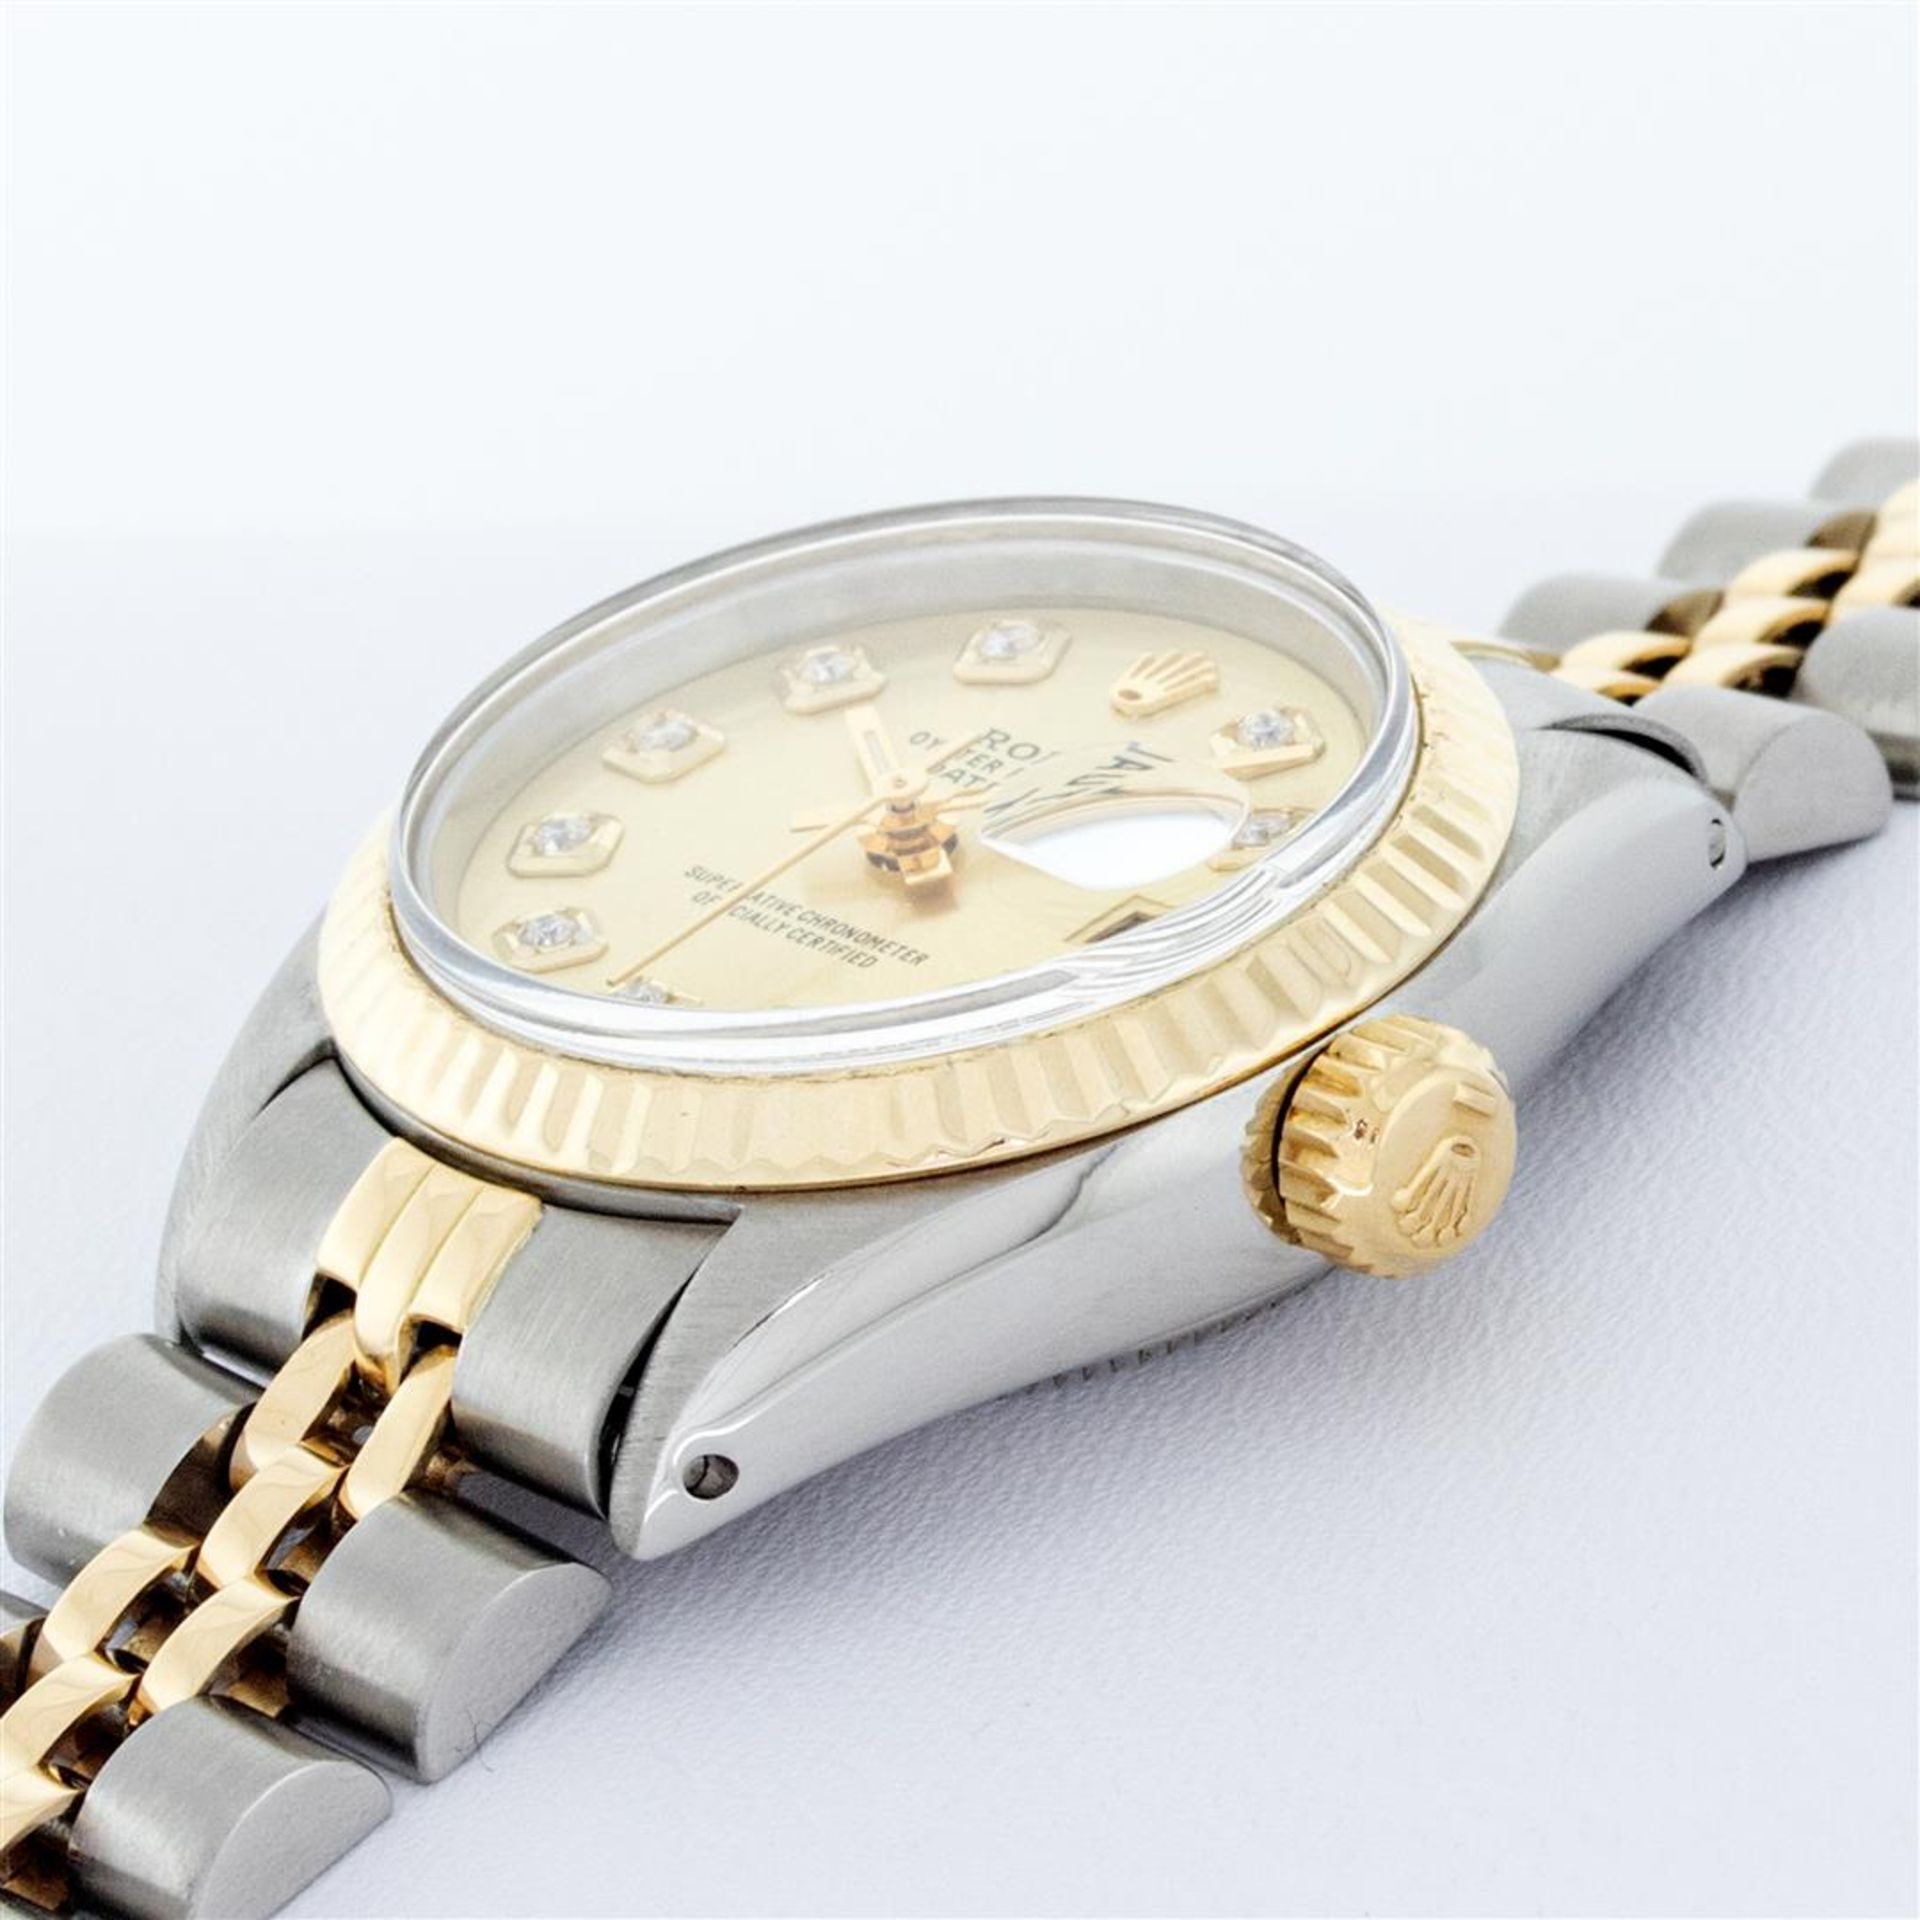 Rolex Ladies 2 Tone Champagne Diamond 26MM Oyster Perpetual Datejust Wristwatch - Image 4 of 9